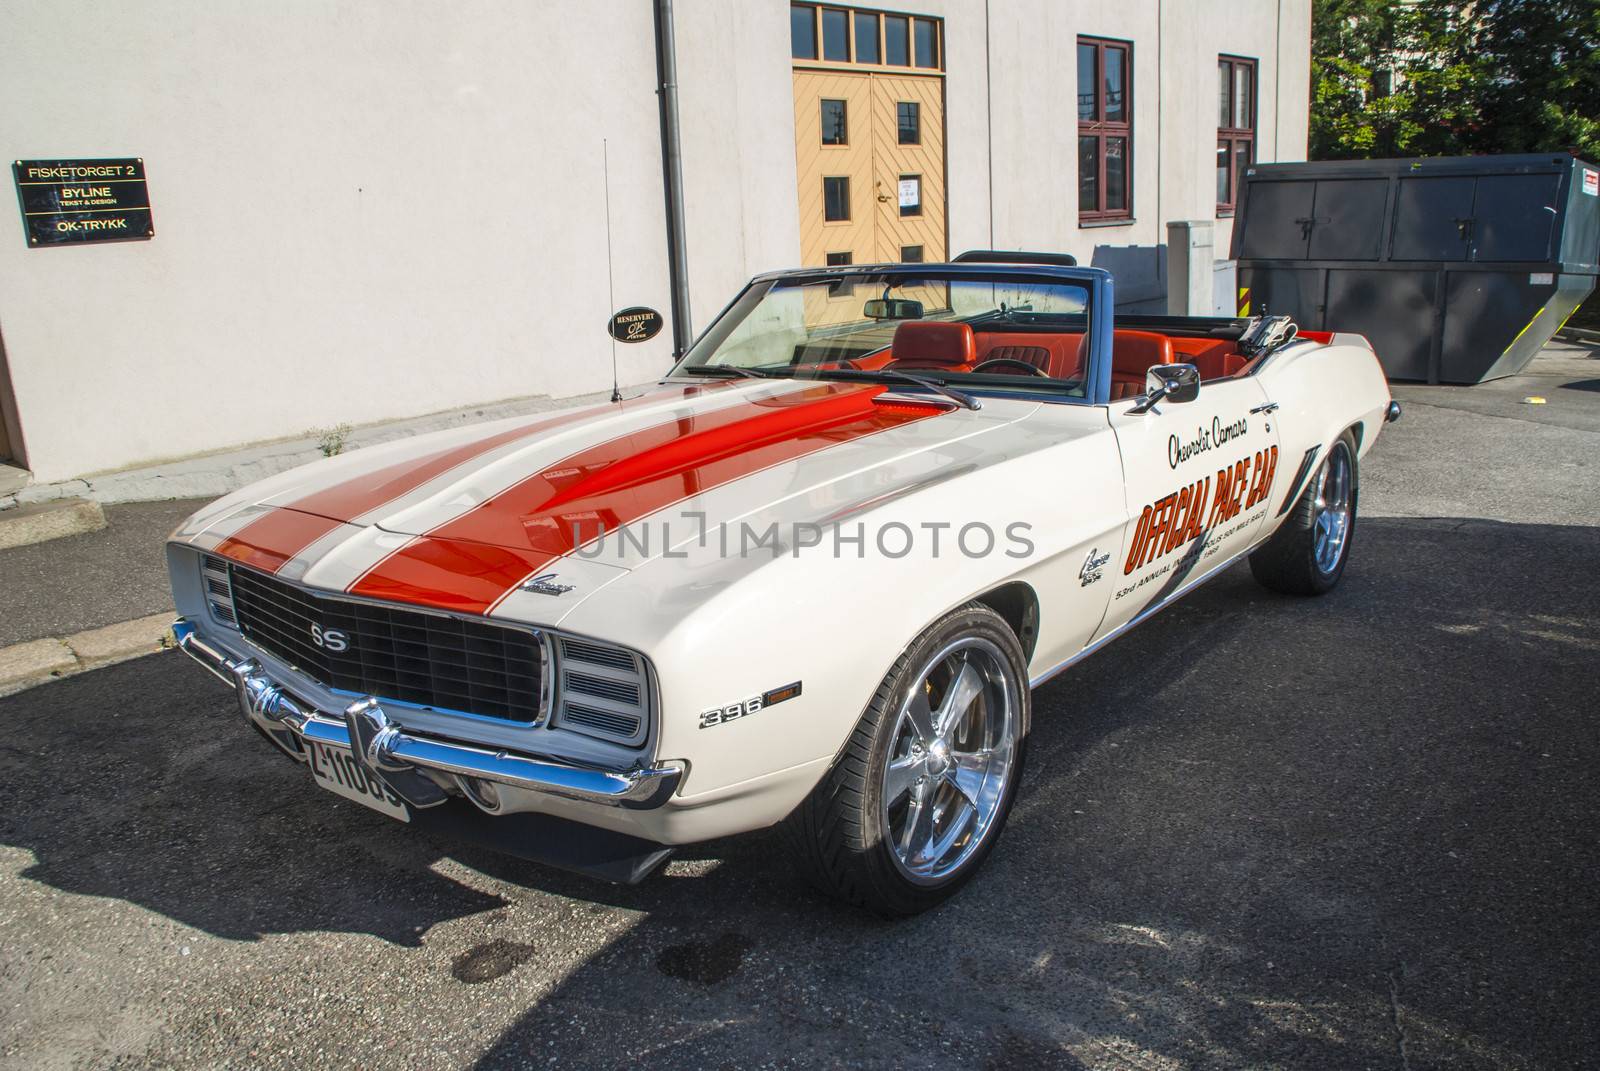 1969 Chevrolet Camaro RS SS Indy Pace Car Convertible 396 Big-block. The car was displayed at the square in Halden, Norway in July 2012.